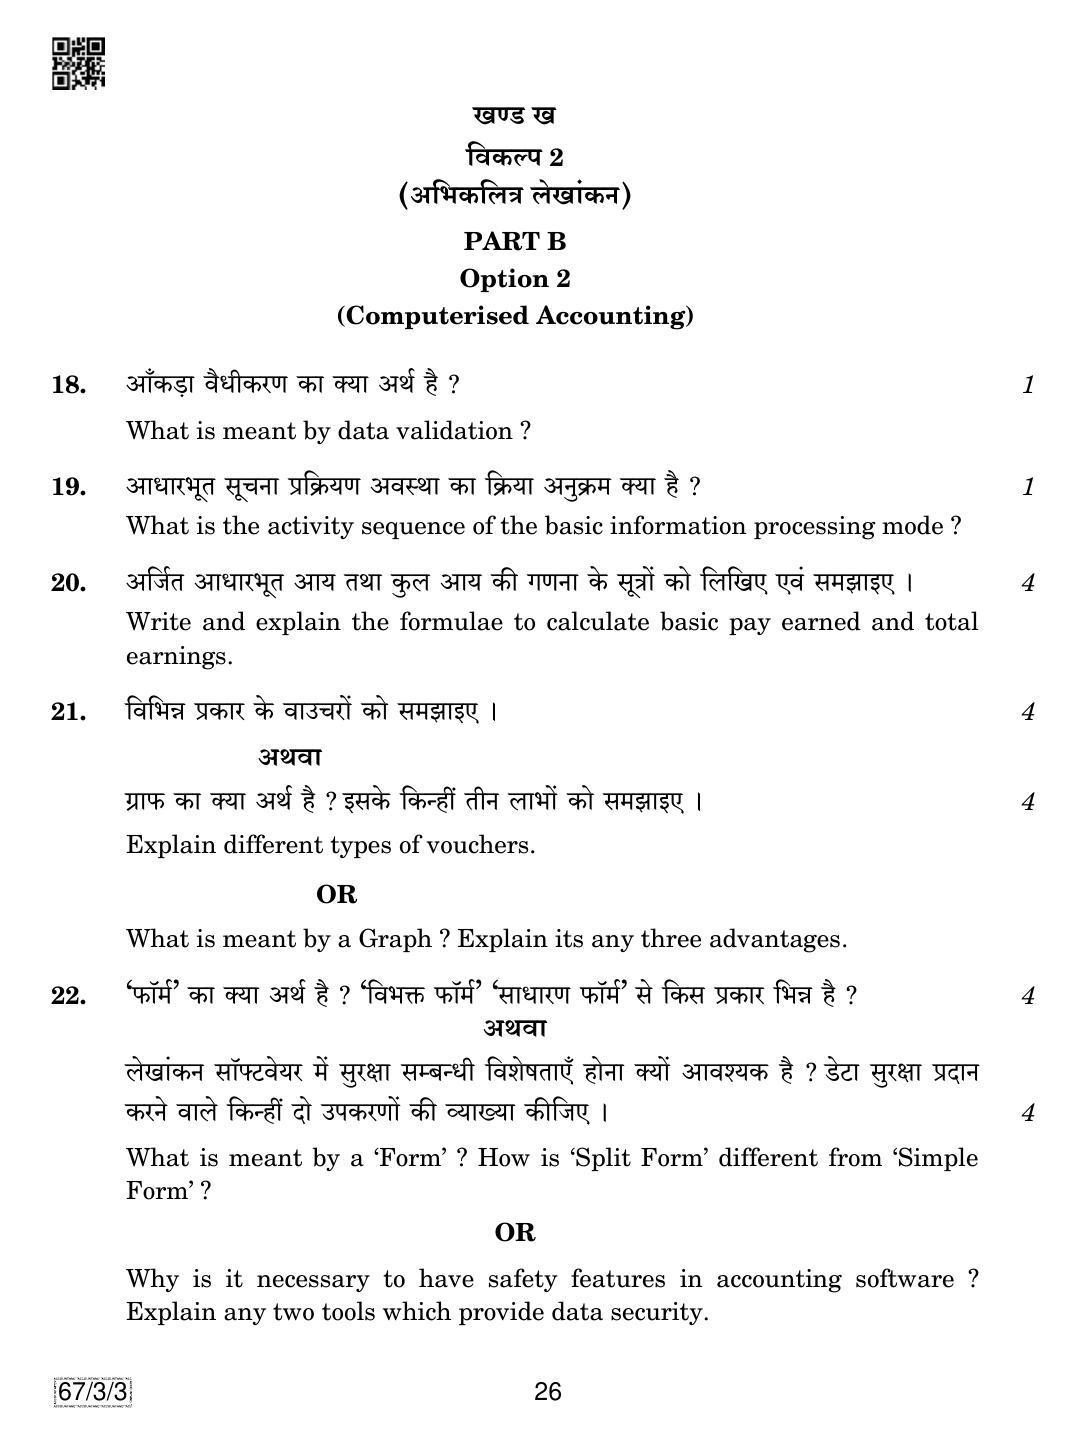 CBSE Class 12 67-3-3 Accountancy 2019 Question Paper - Page 26